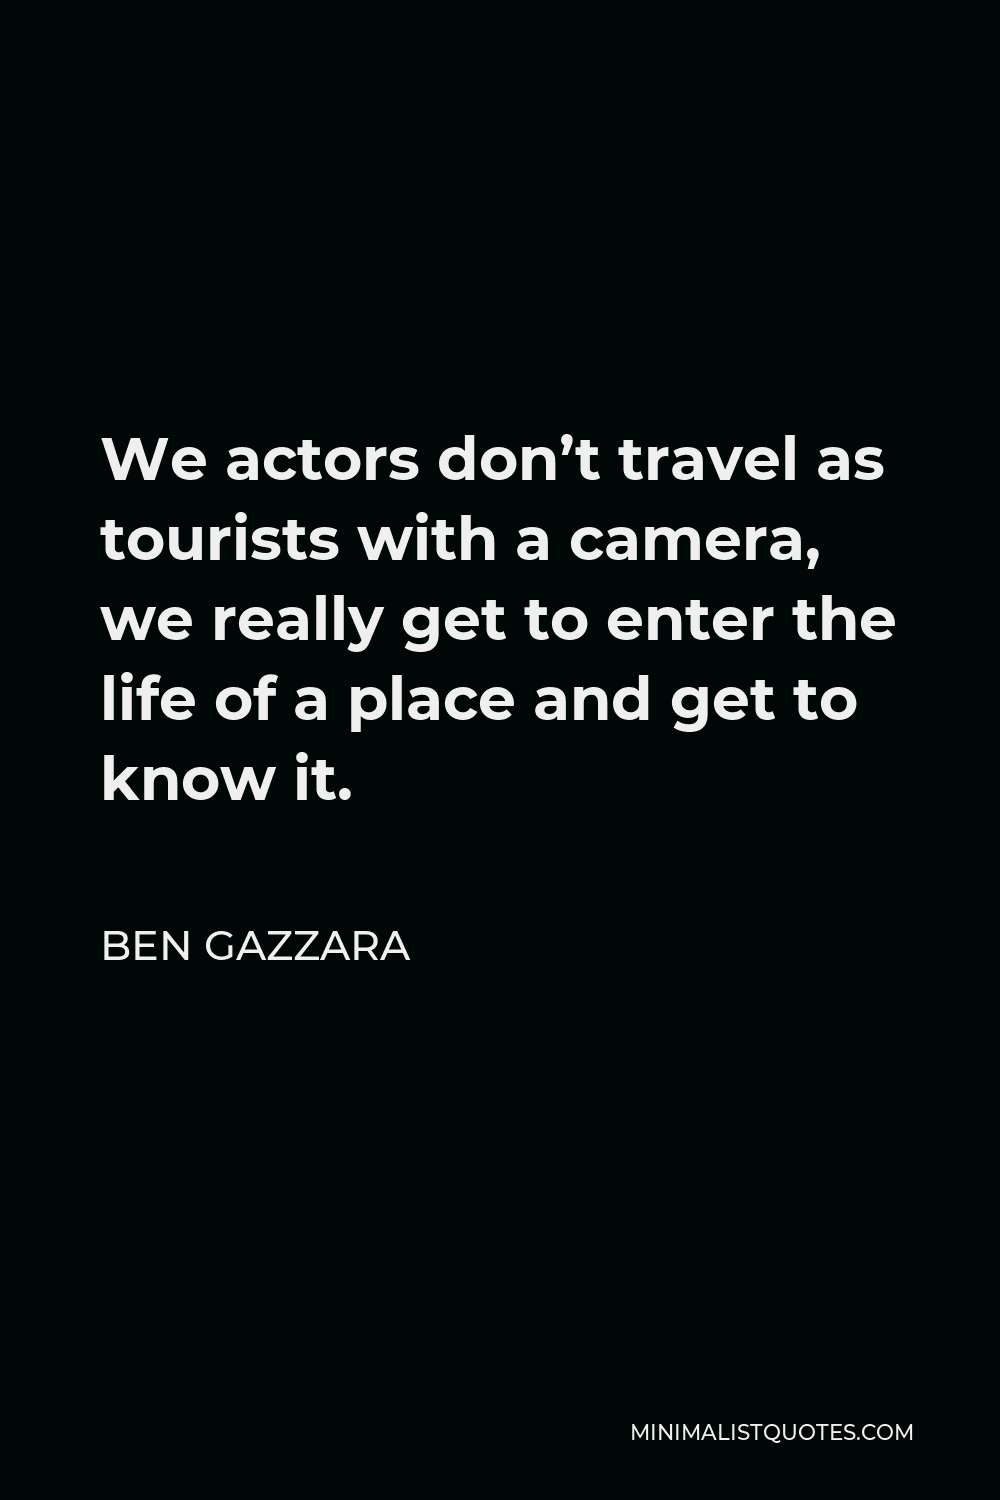 Ben Gazzara Quote - We actors don’t travel as tourists with a camera, we really get to enter the life of a place and get to know it.